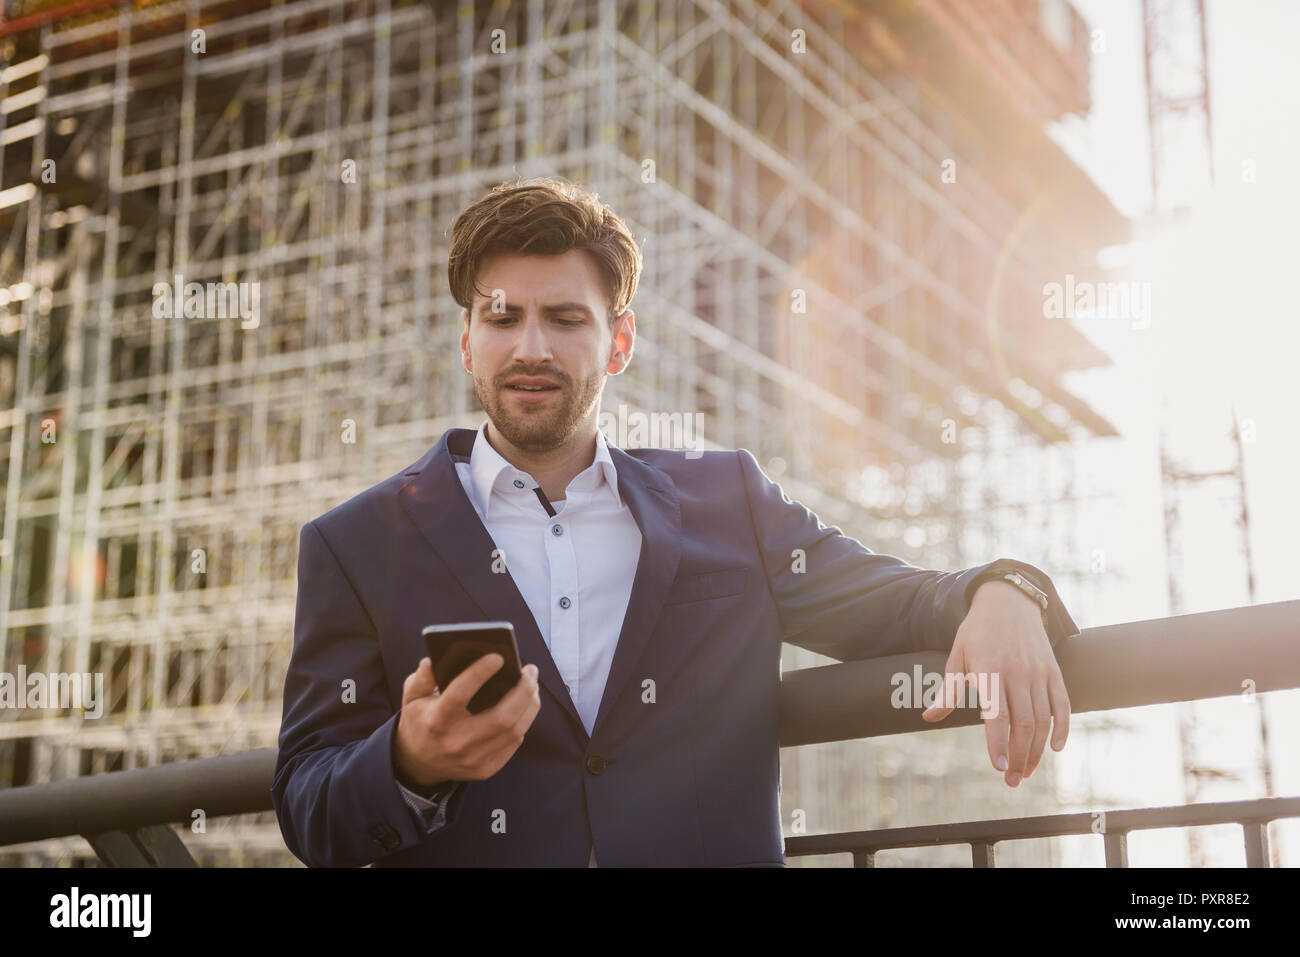 Businessman standing on bridge in front of construction site using cell phone Stock Photo